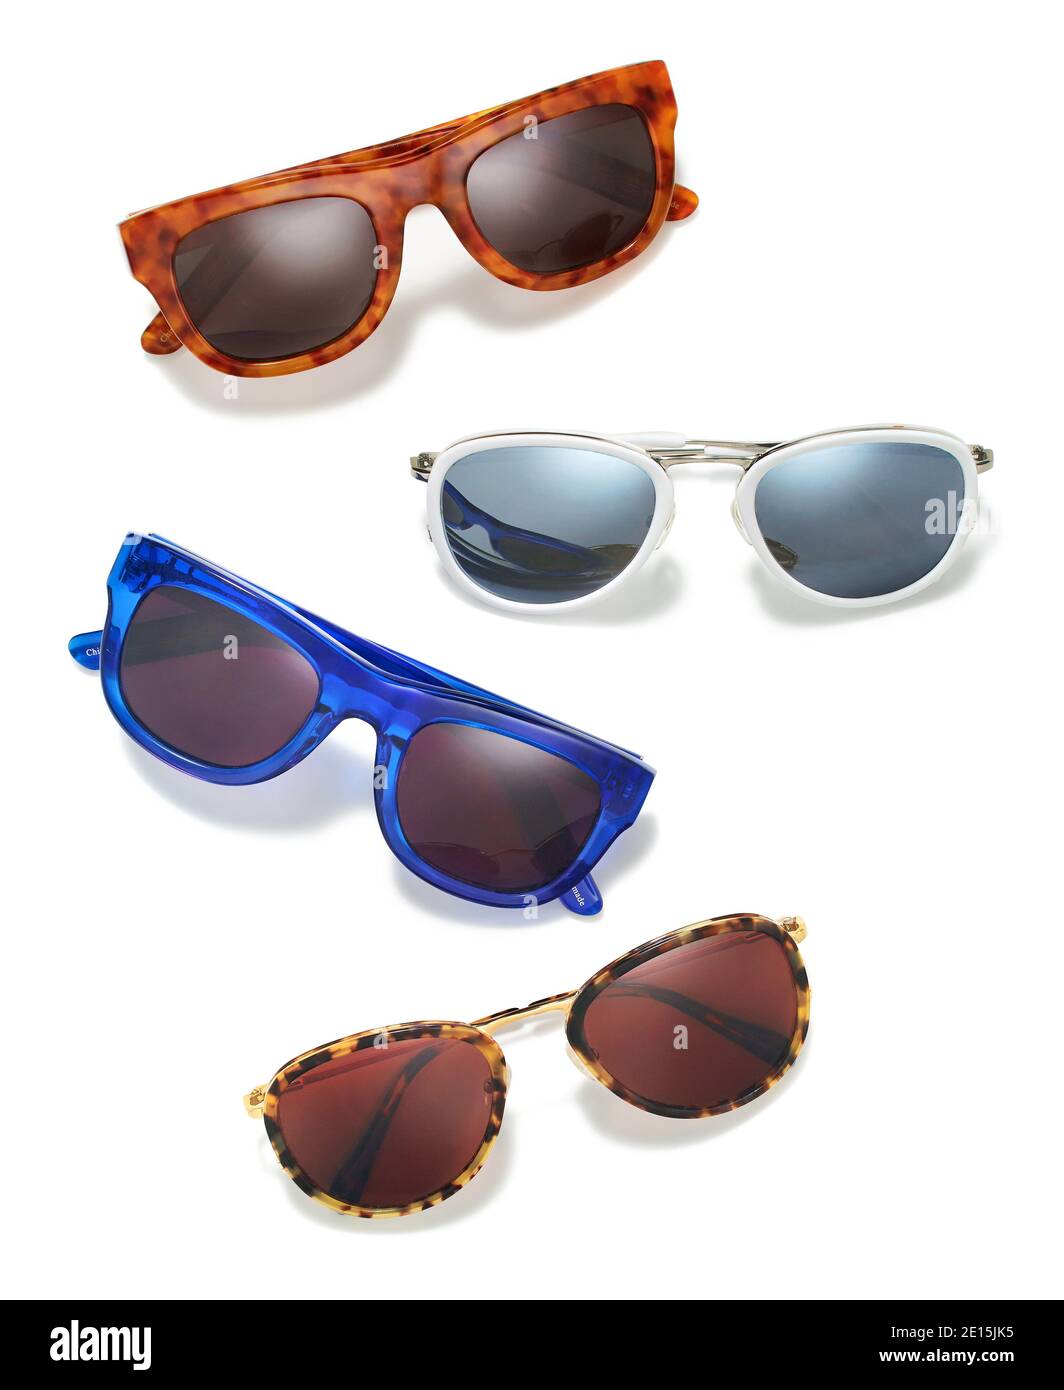 Four pairs of colorful sunglasses from the SUMMER 2014 C.Wonder Look ...